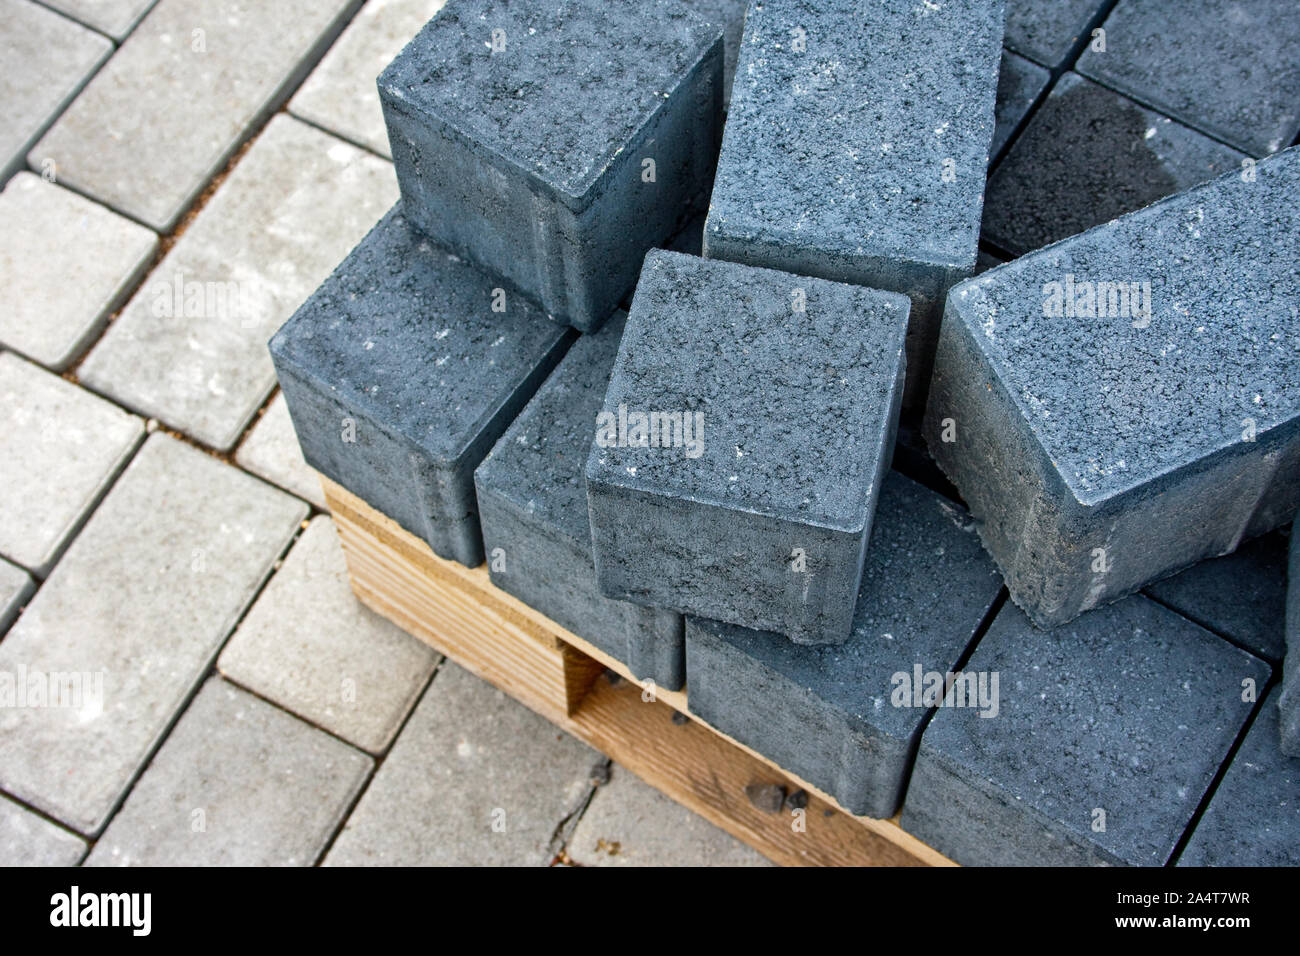 Dark grey paving stones for road works on wooden pallets, below light-coloured paving stones Stock Photo